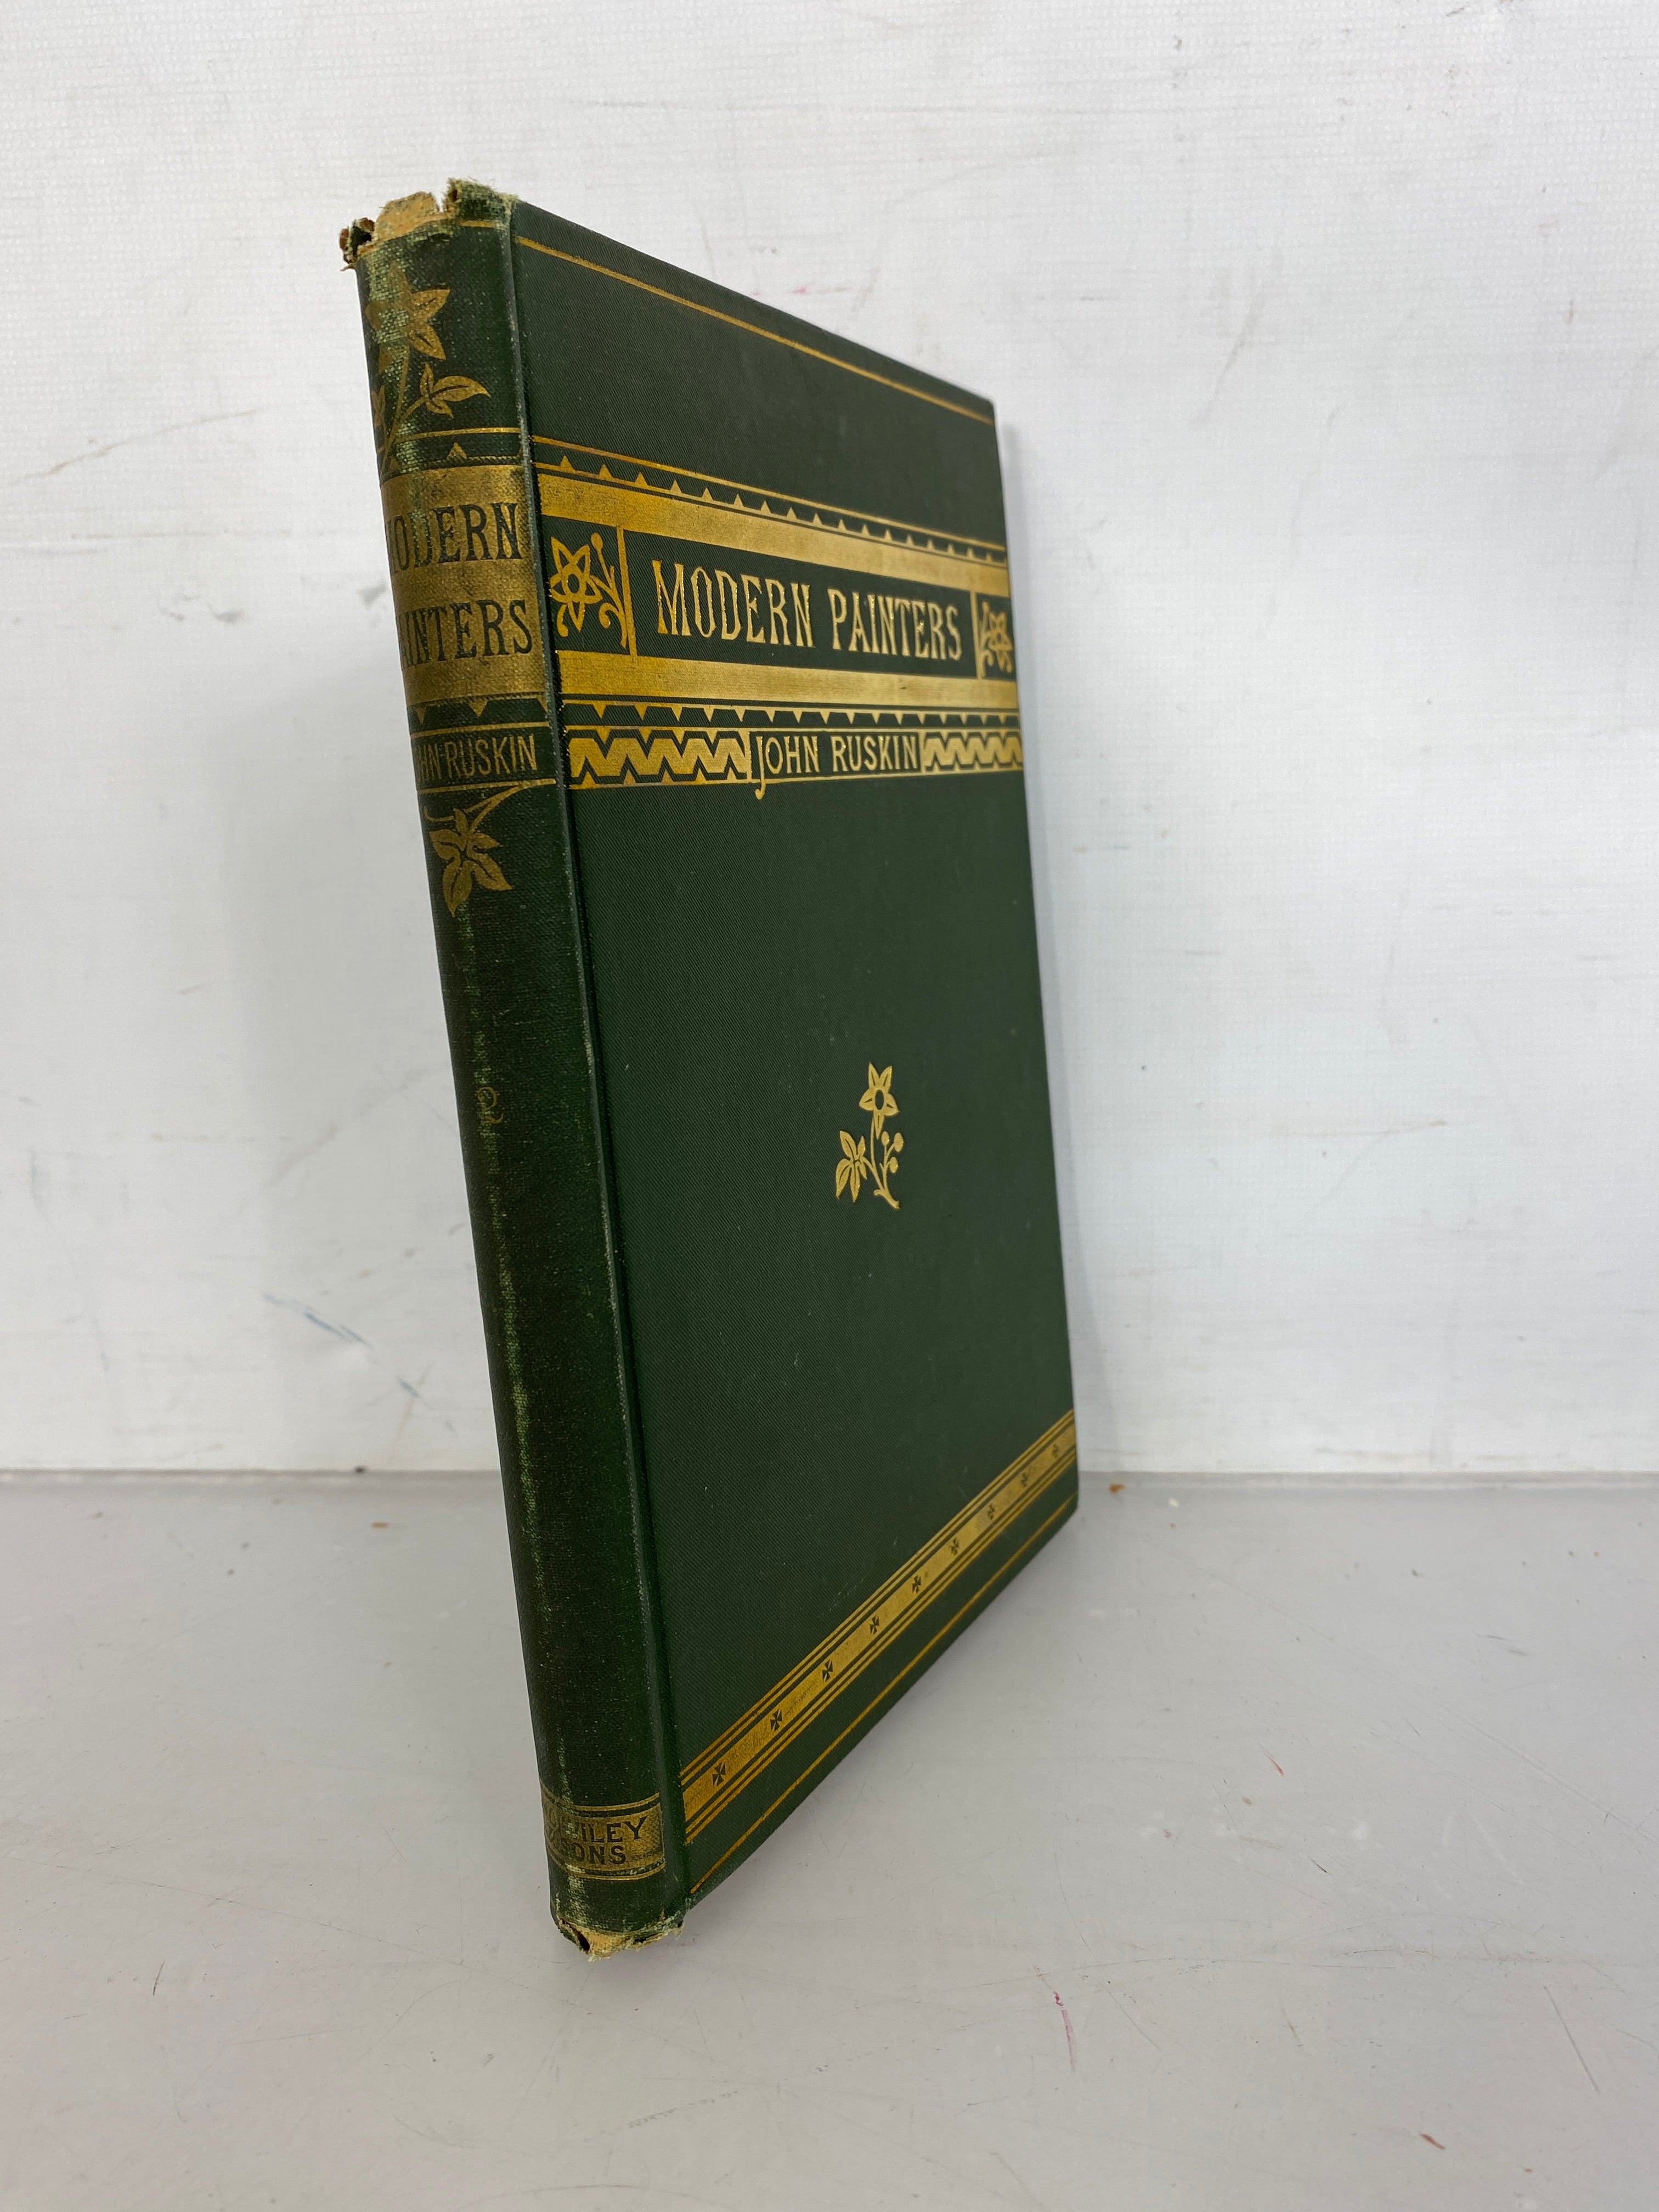 2 Volumes (II and V) of Antique Modern Painters by John Ruskin 1878 John Wiley & Sons HC